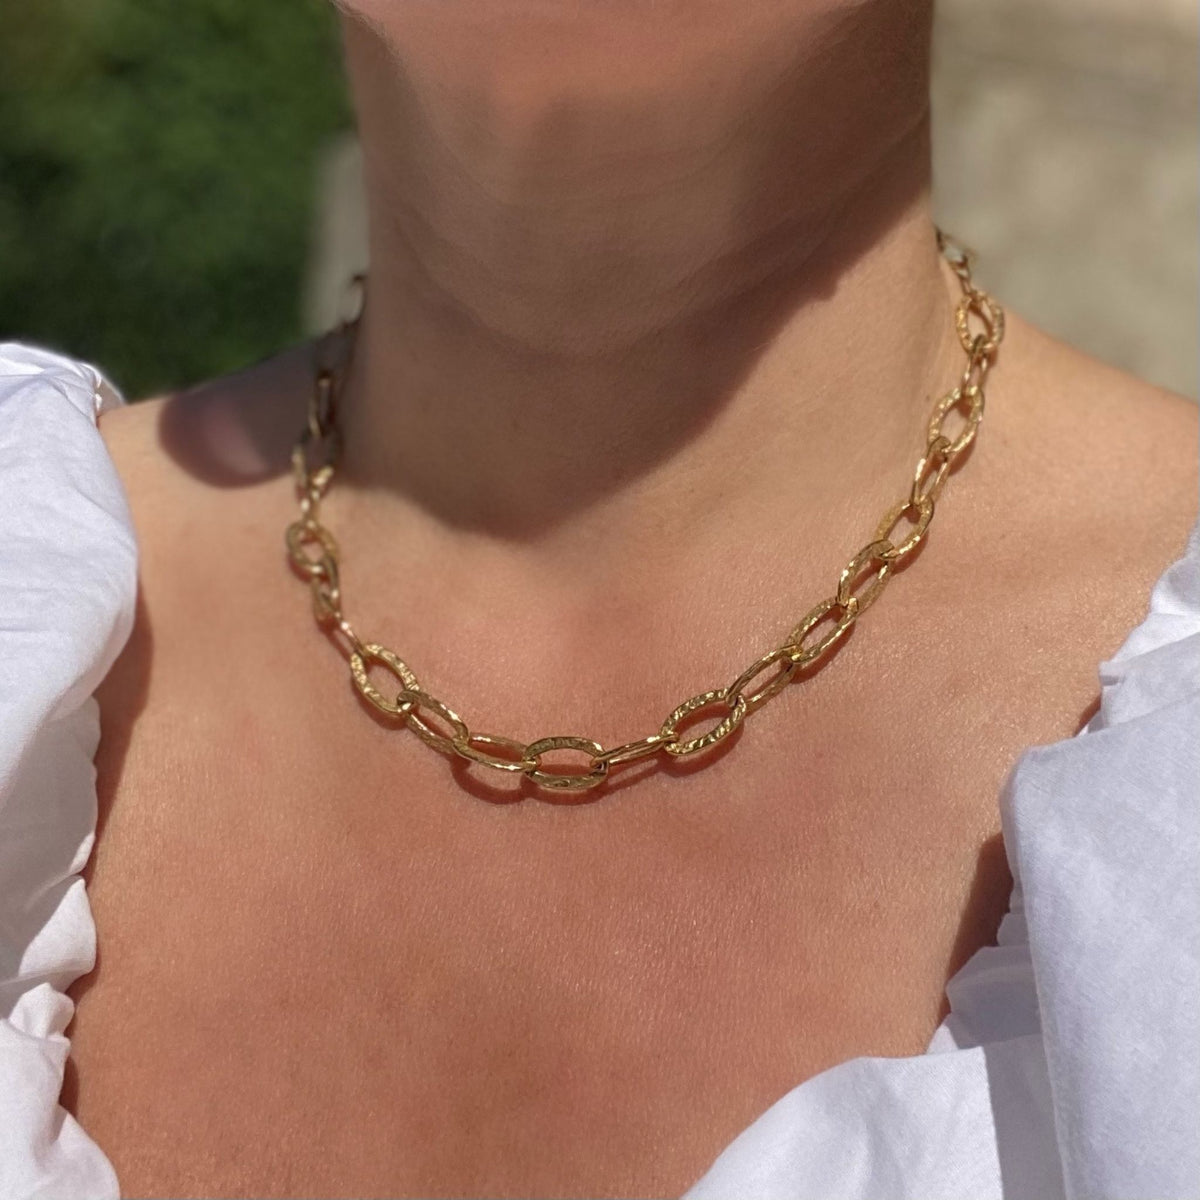 Sisterhood Necklace - 18K Gold Vermeil Chunky Chain Necklace with Baroque Pearl